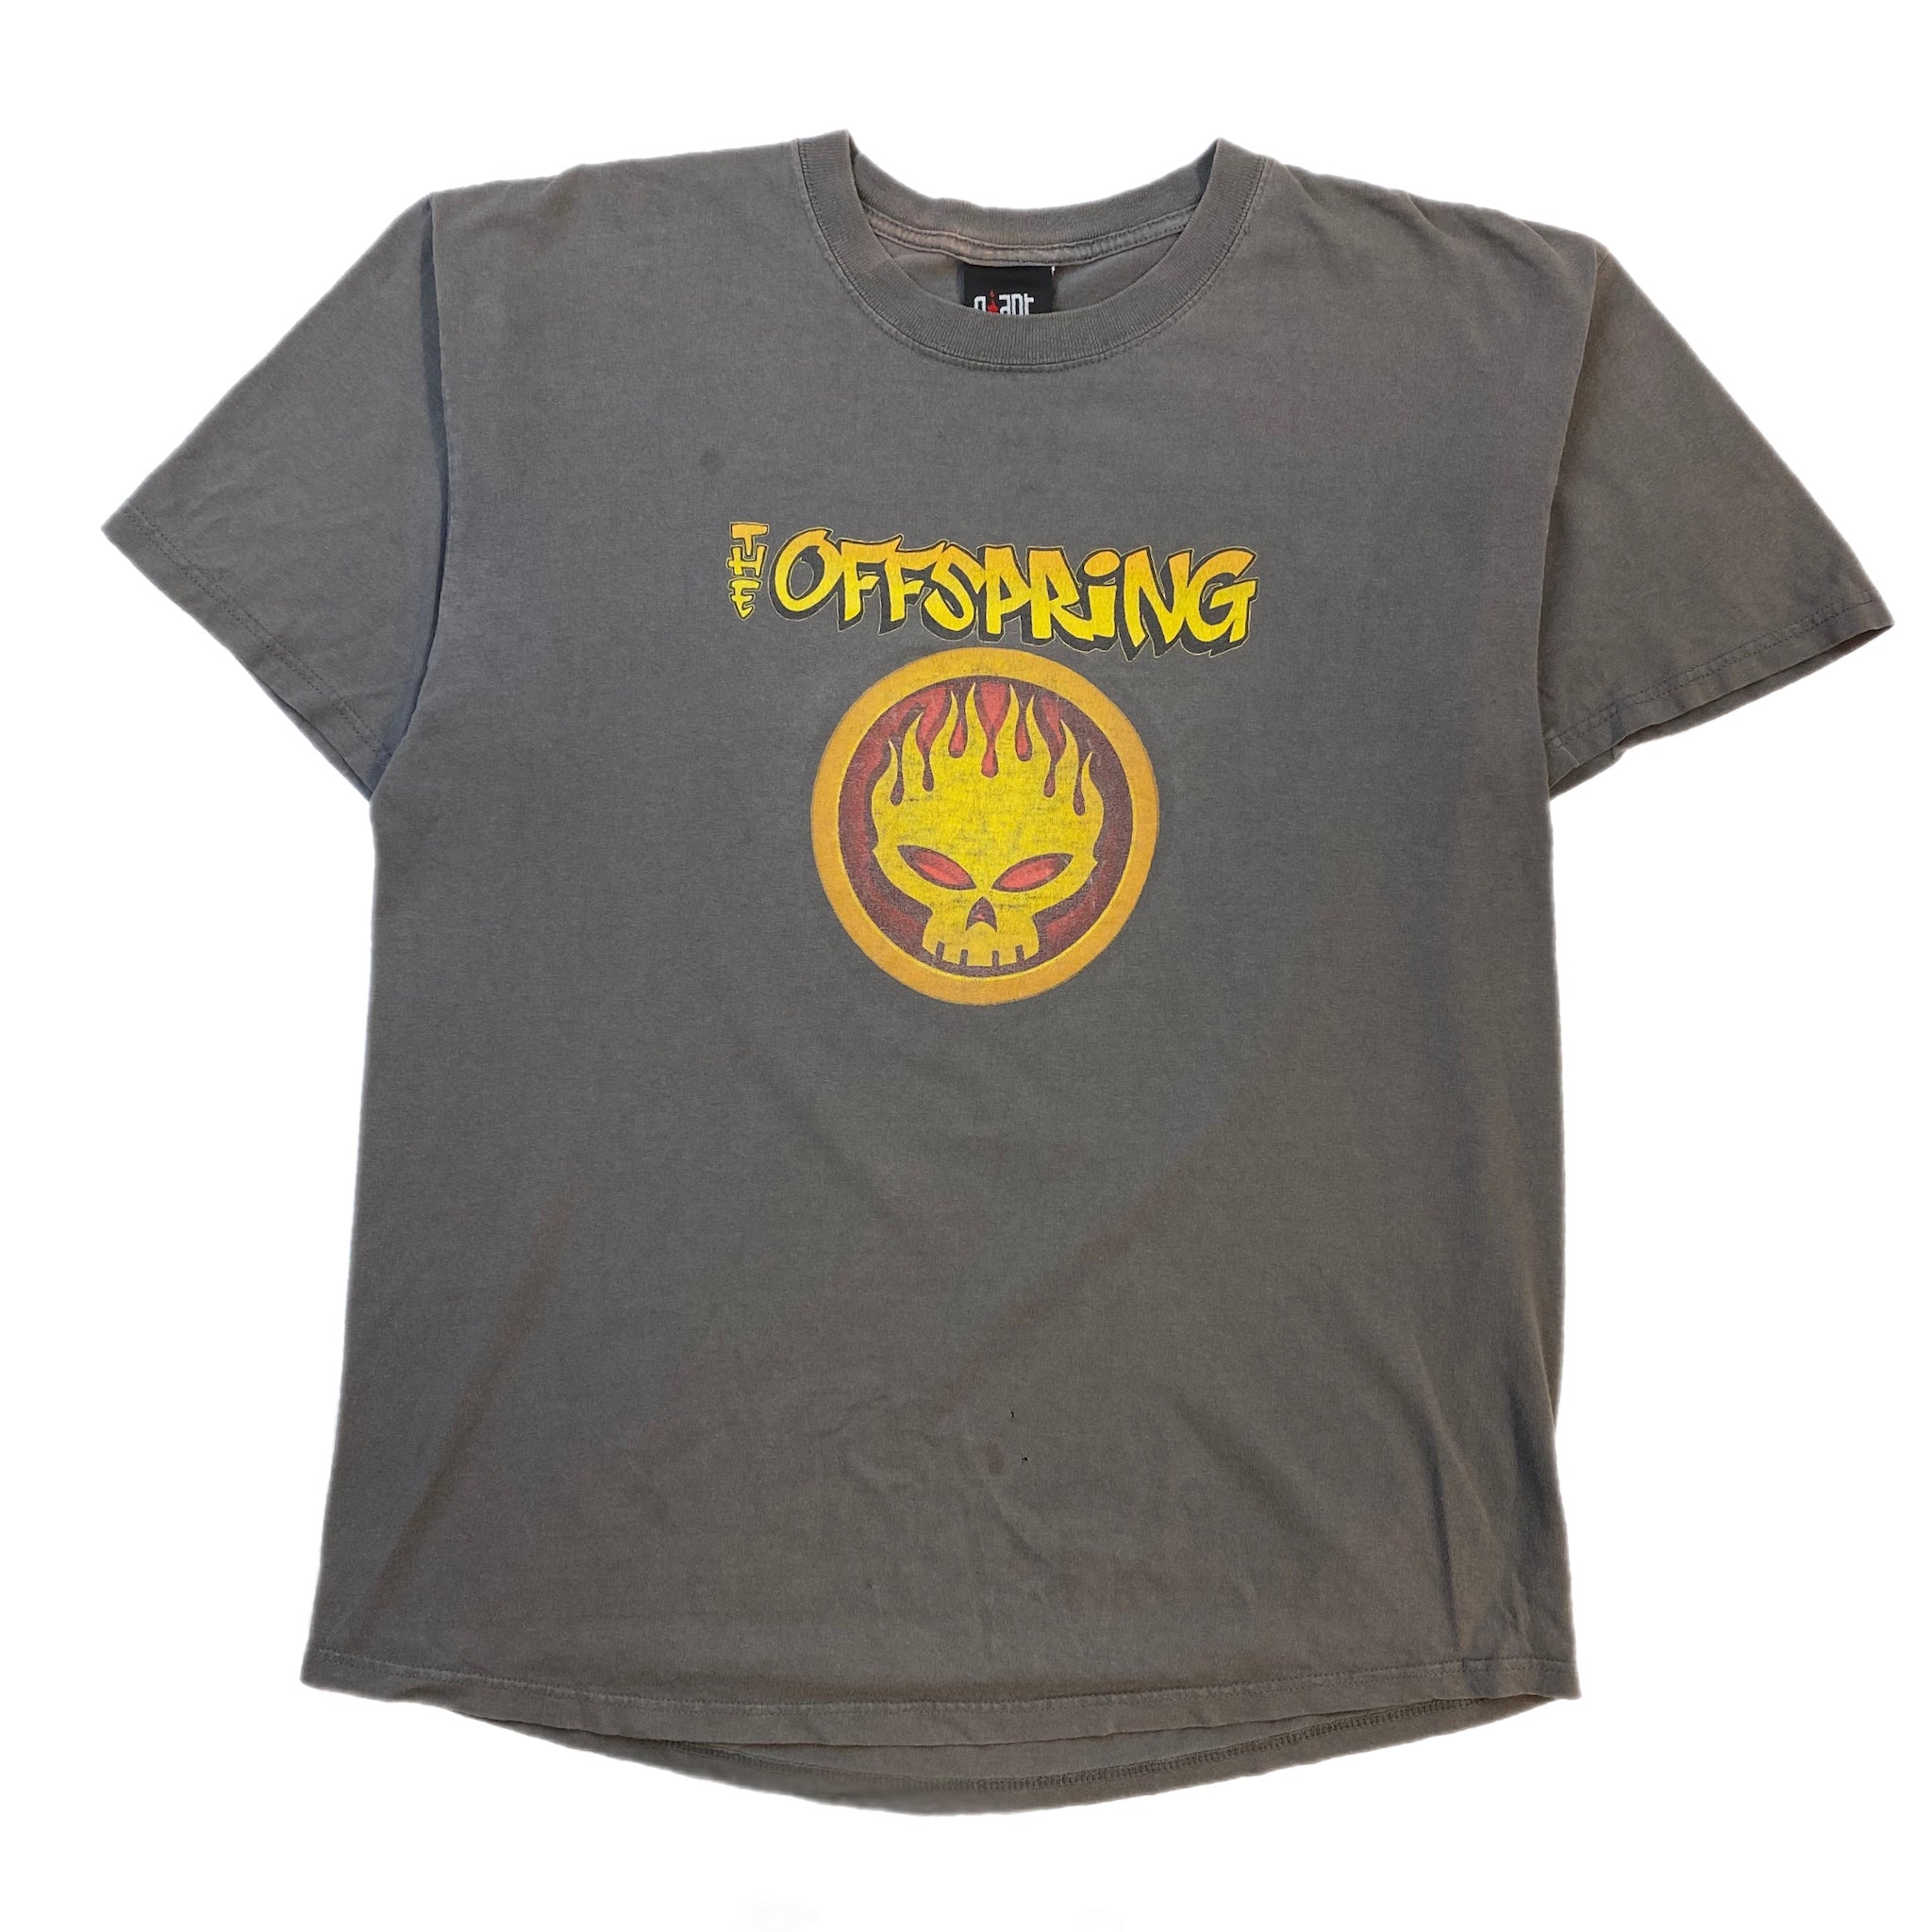 Vintage The Offspring Conspiracy Of One Tour Tee Grey